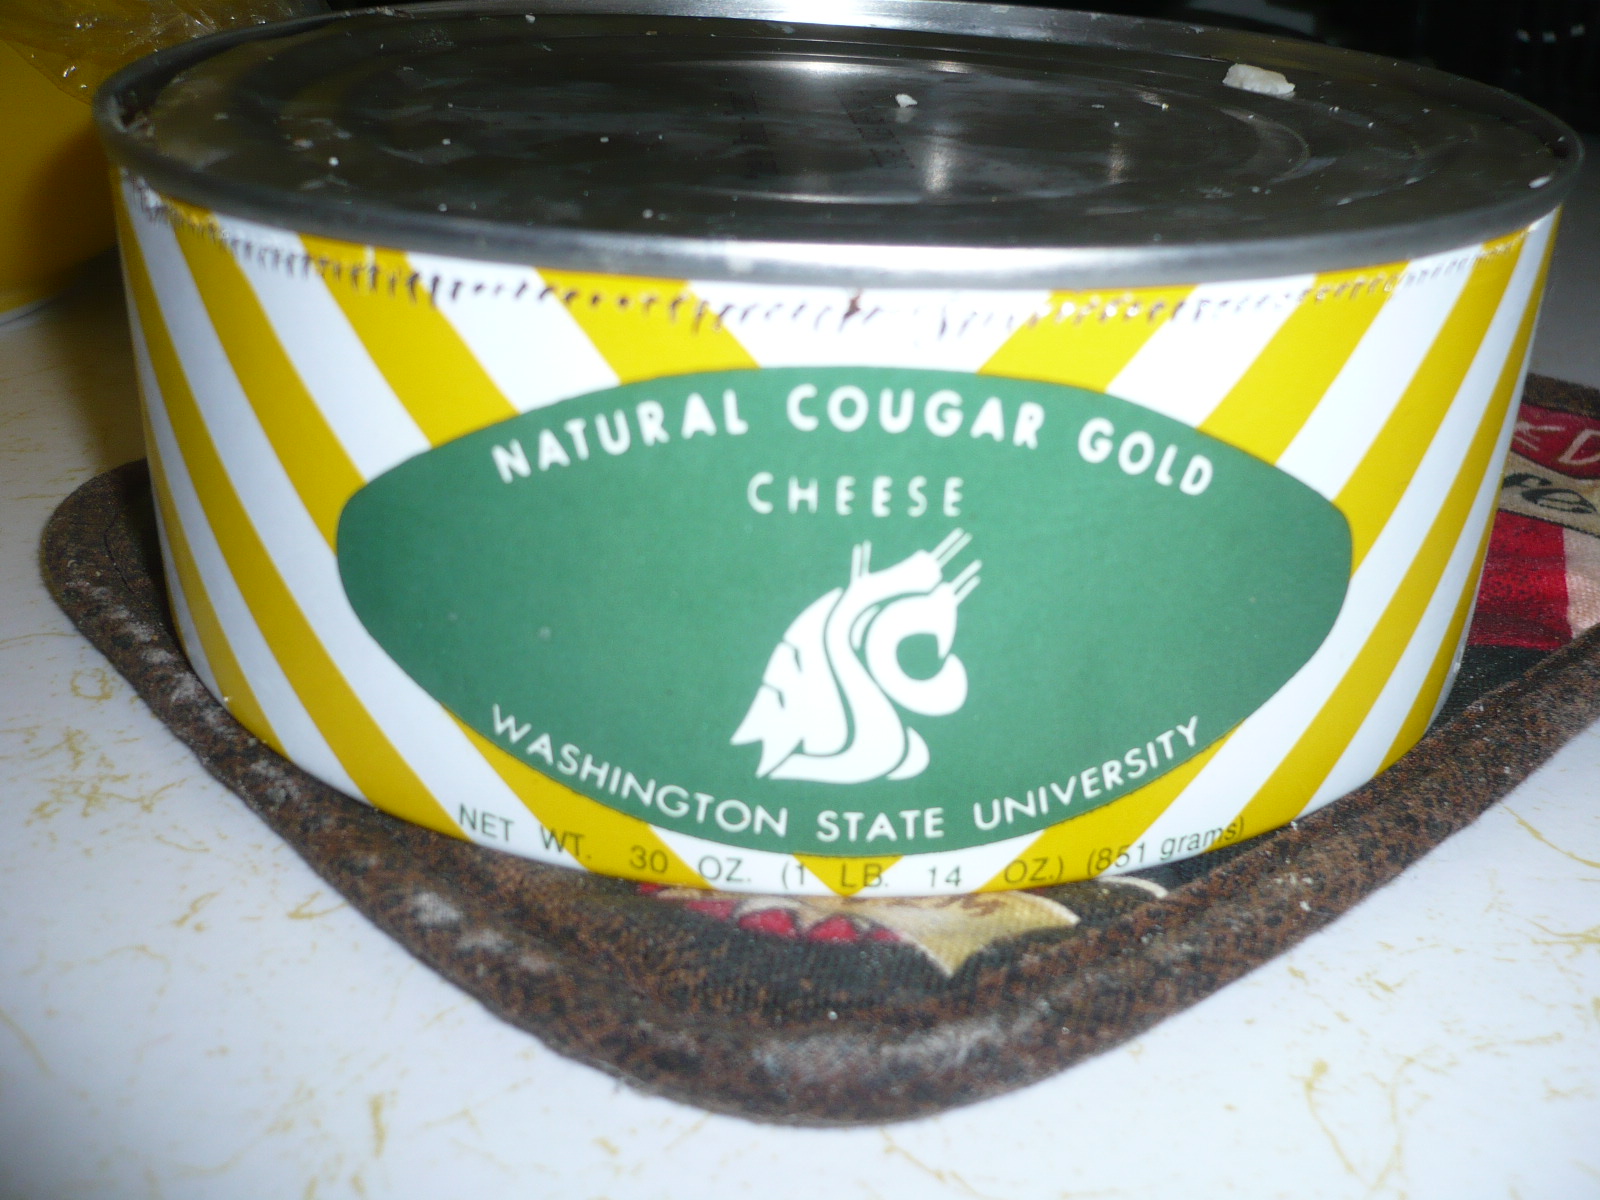 Who makes Cougar Gold cheese?